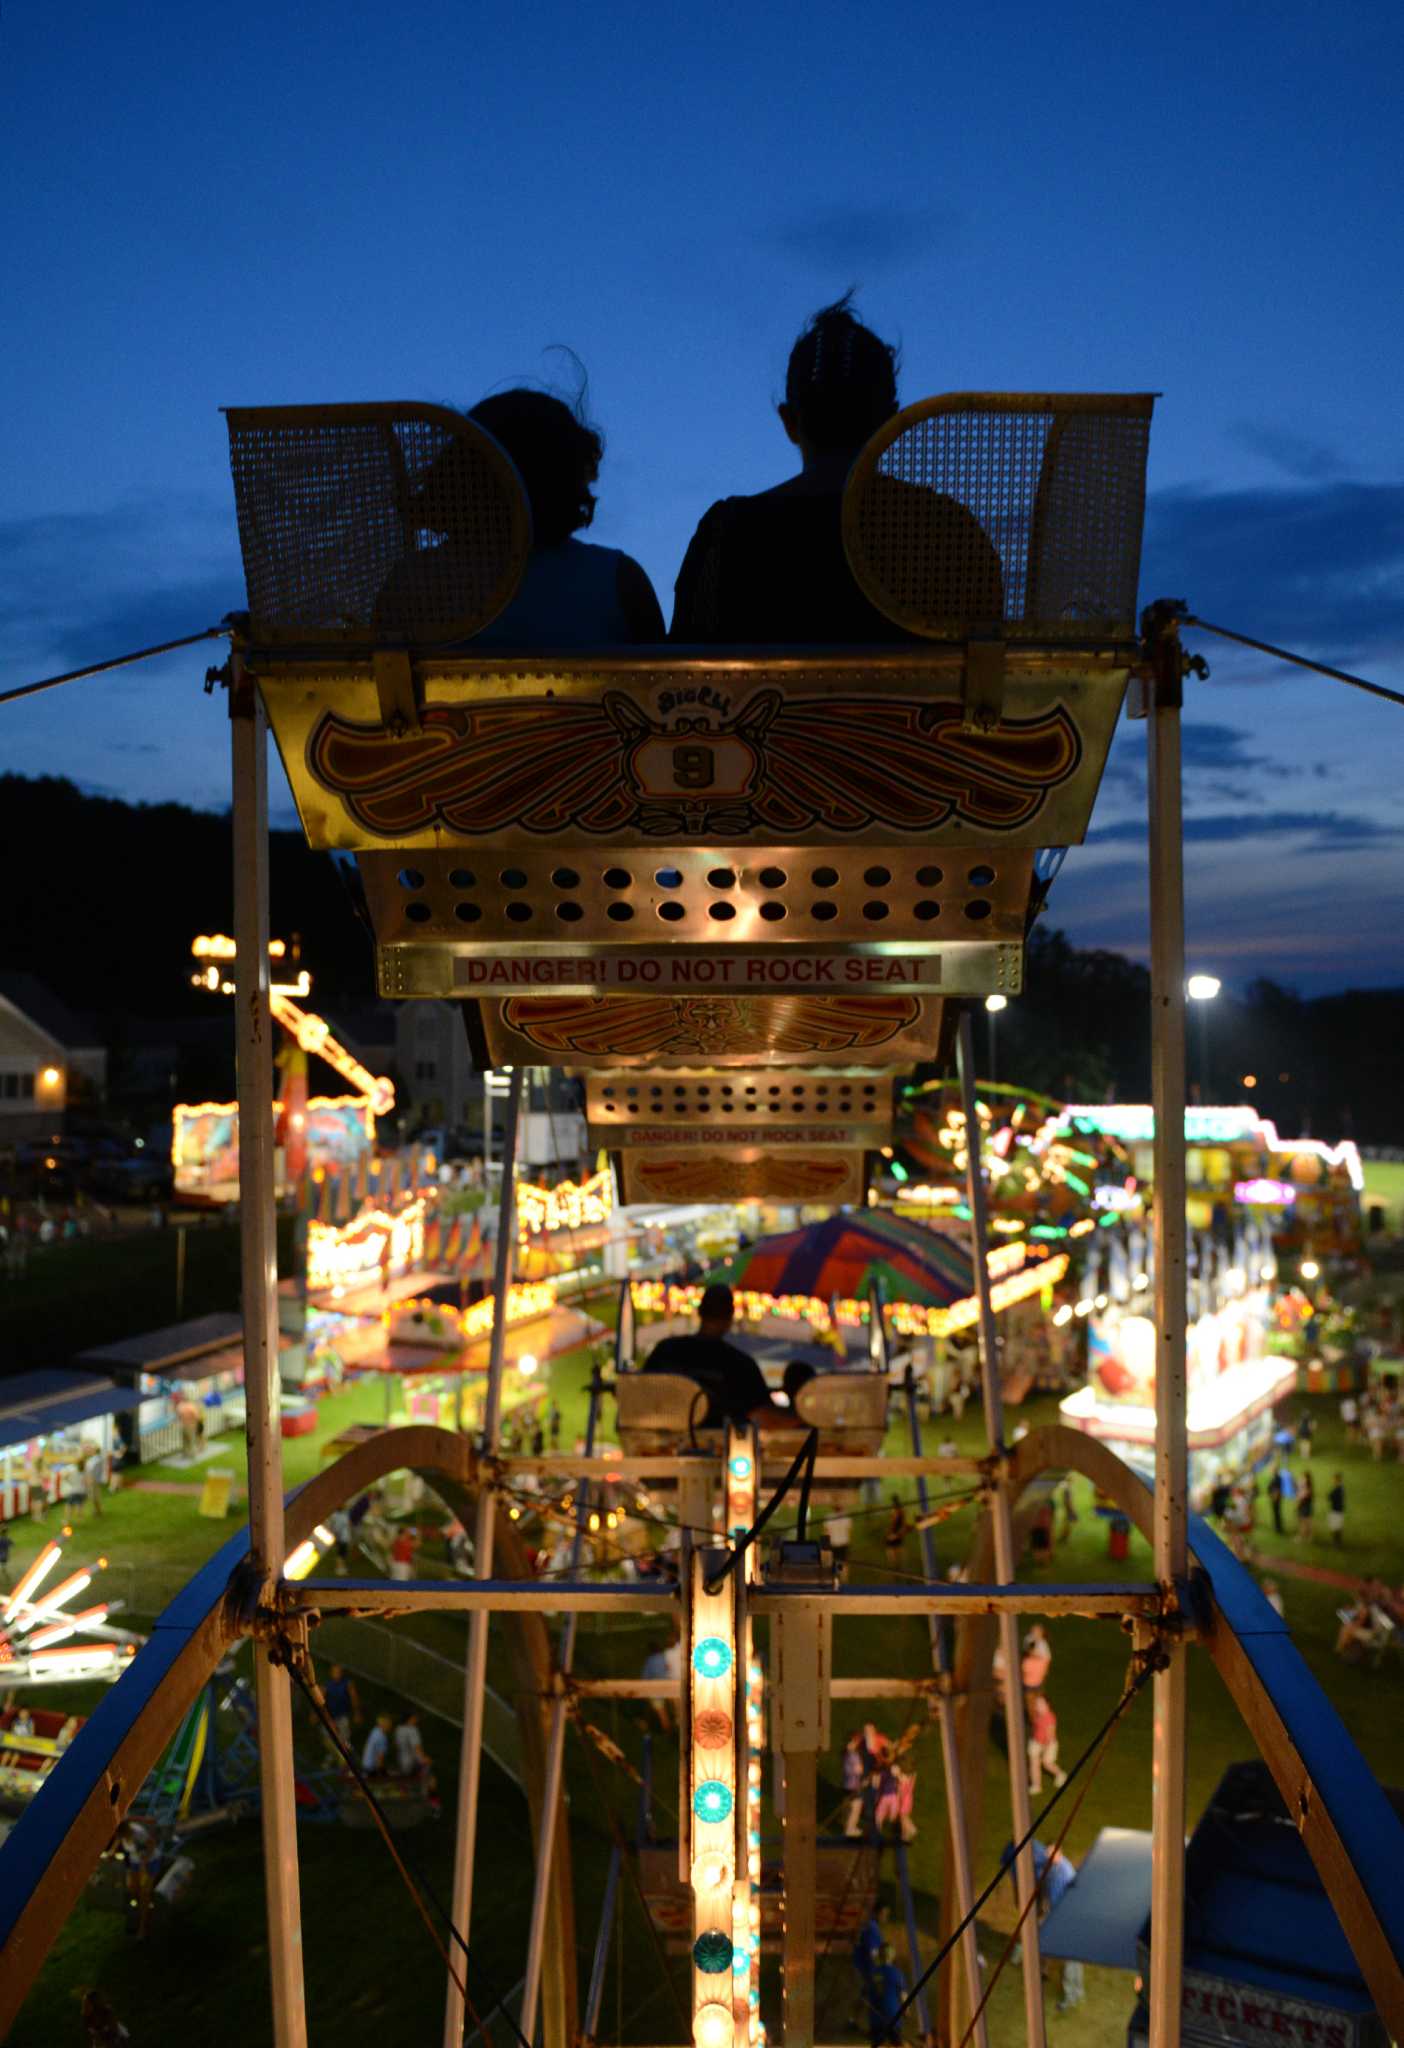 'Olde Tyme' carnival lights up New Fairfield